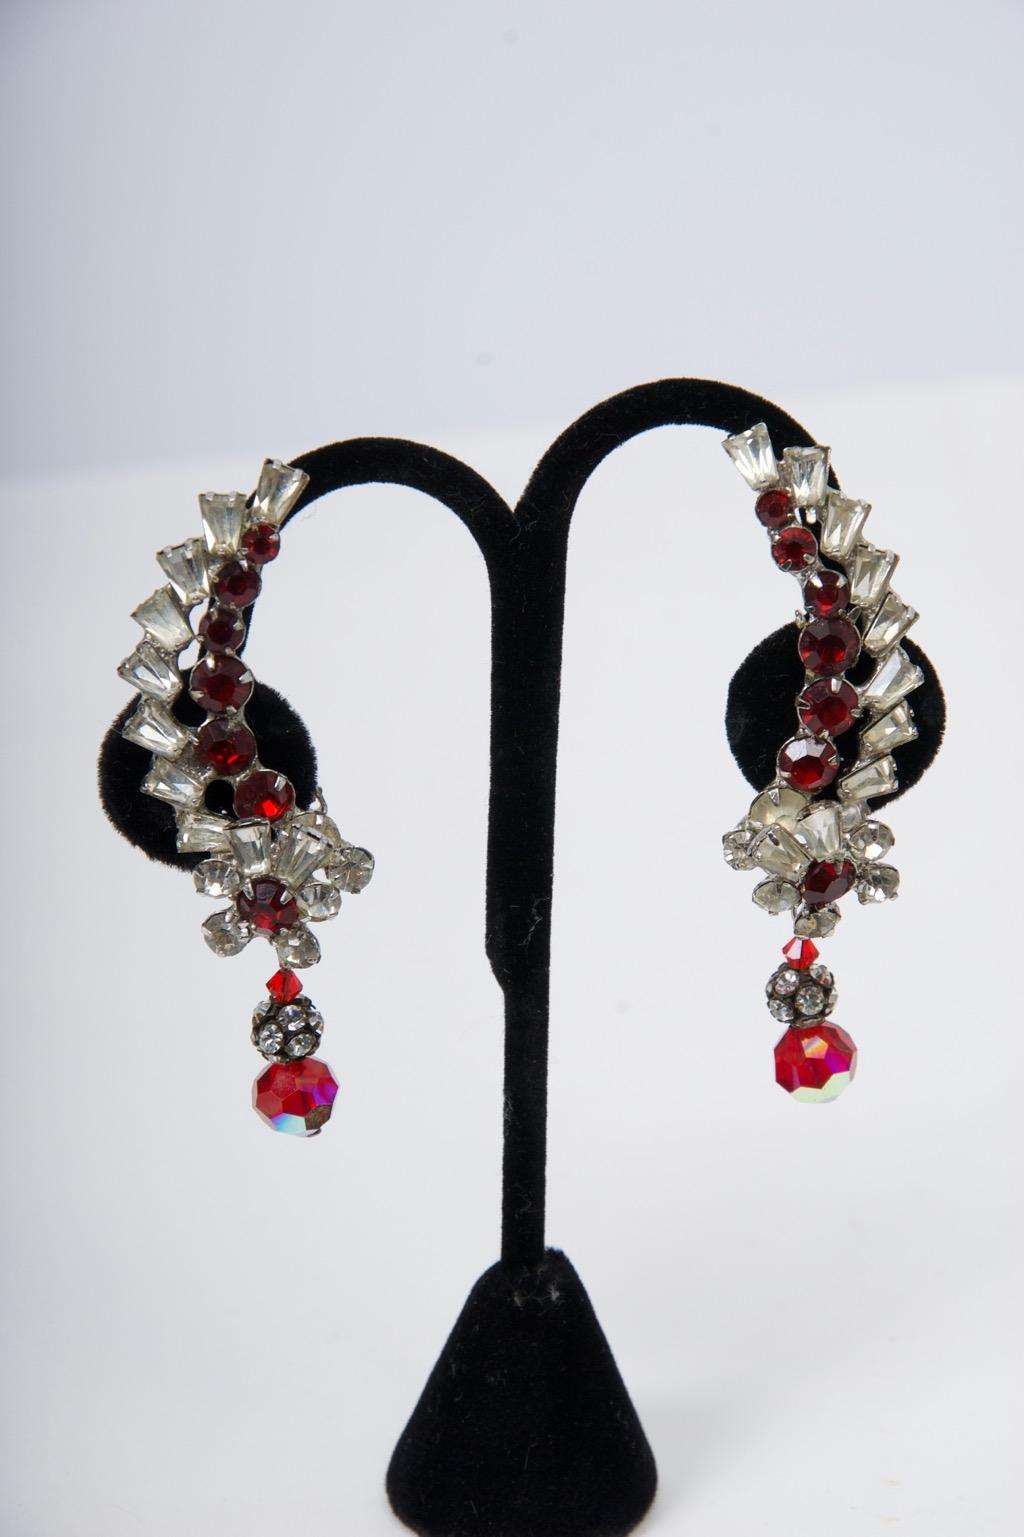 Dramatic rhinestone and ruby stone ear clips that follow the curve of the earlobe. The earpiece, composed of clear and ruby crystals, tapers at the top and terminates in an applied floral motif that suspends a rhinestone rondel and faceted red